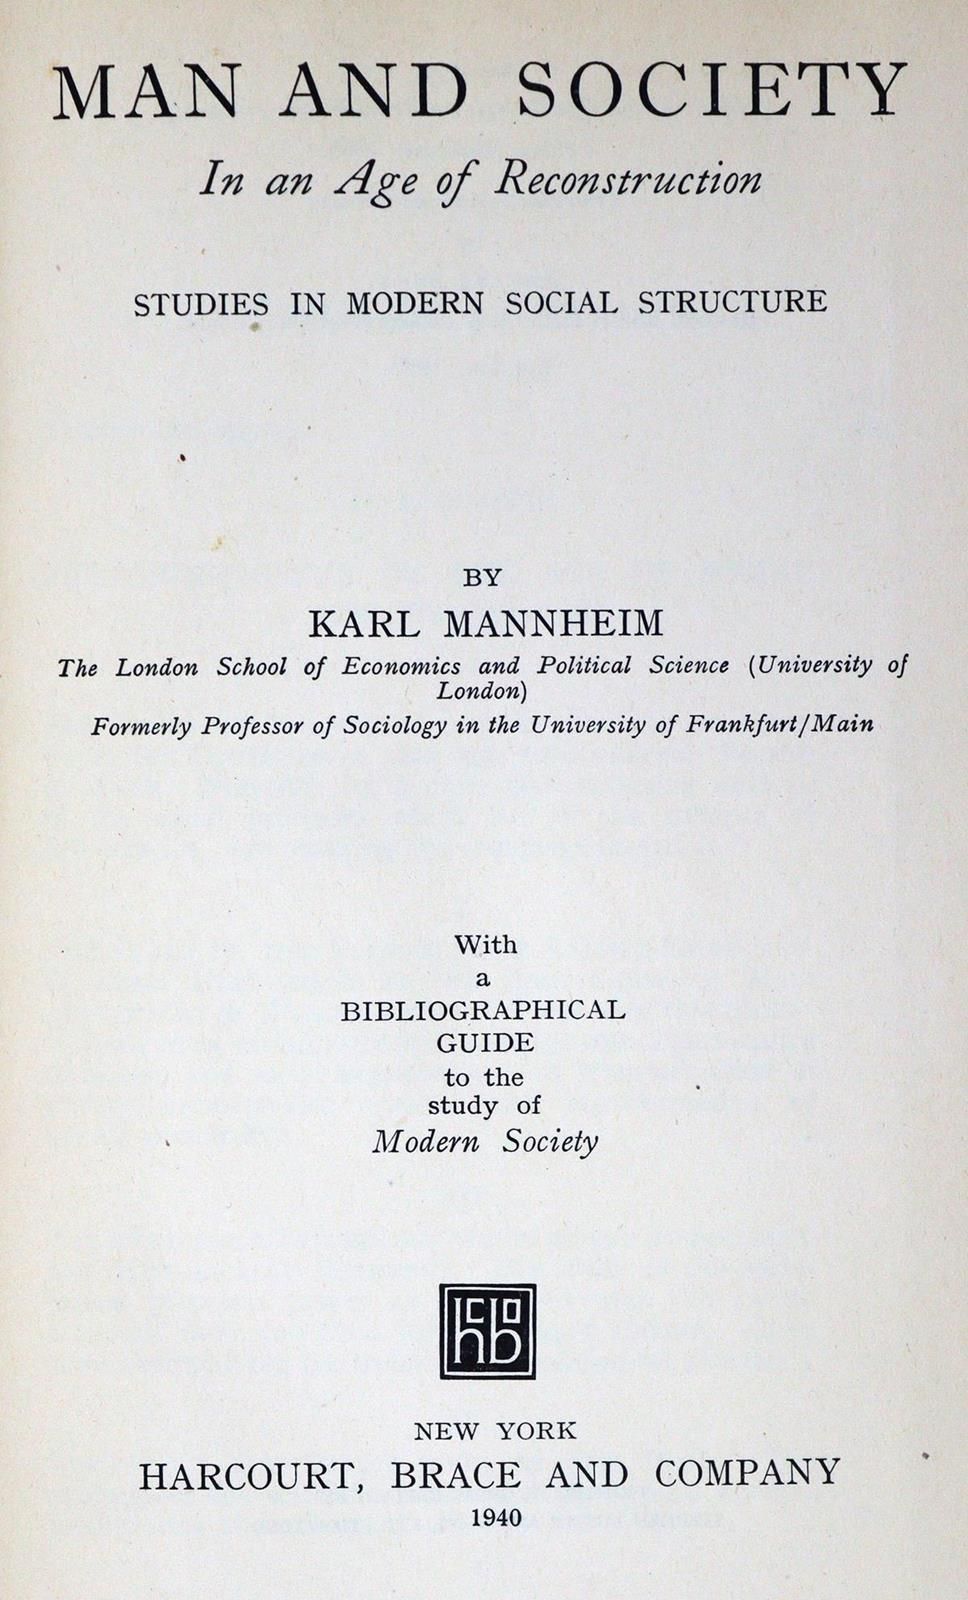 Mannheim,K. Man and society in an age of reconstruction. Studies in modern socia&hellip;